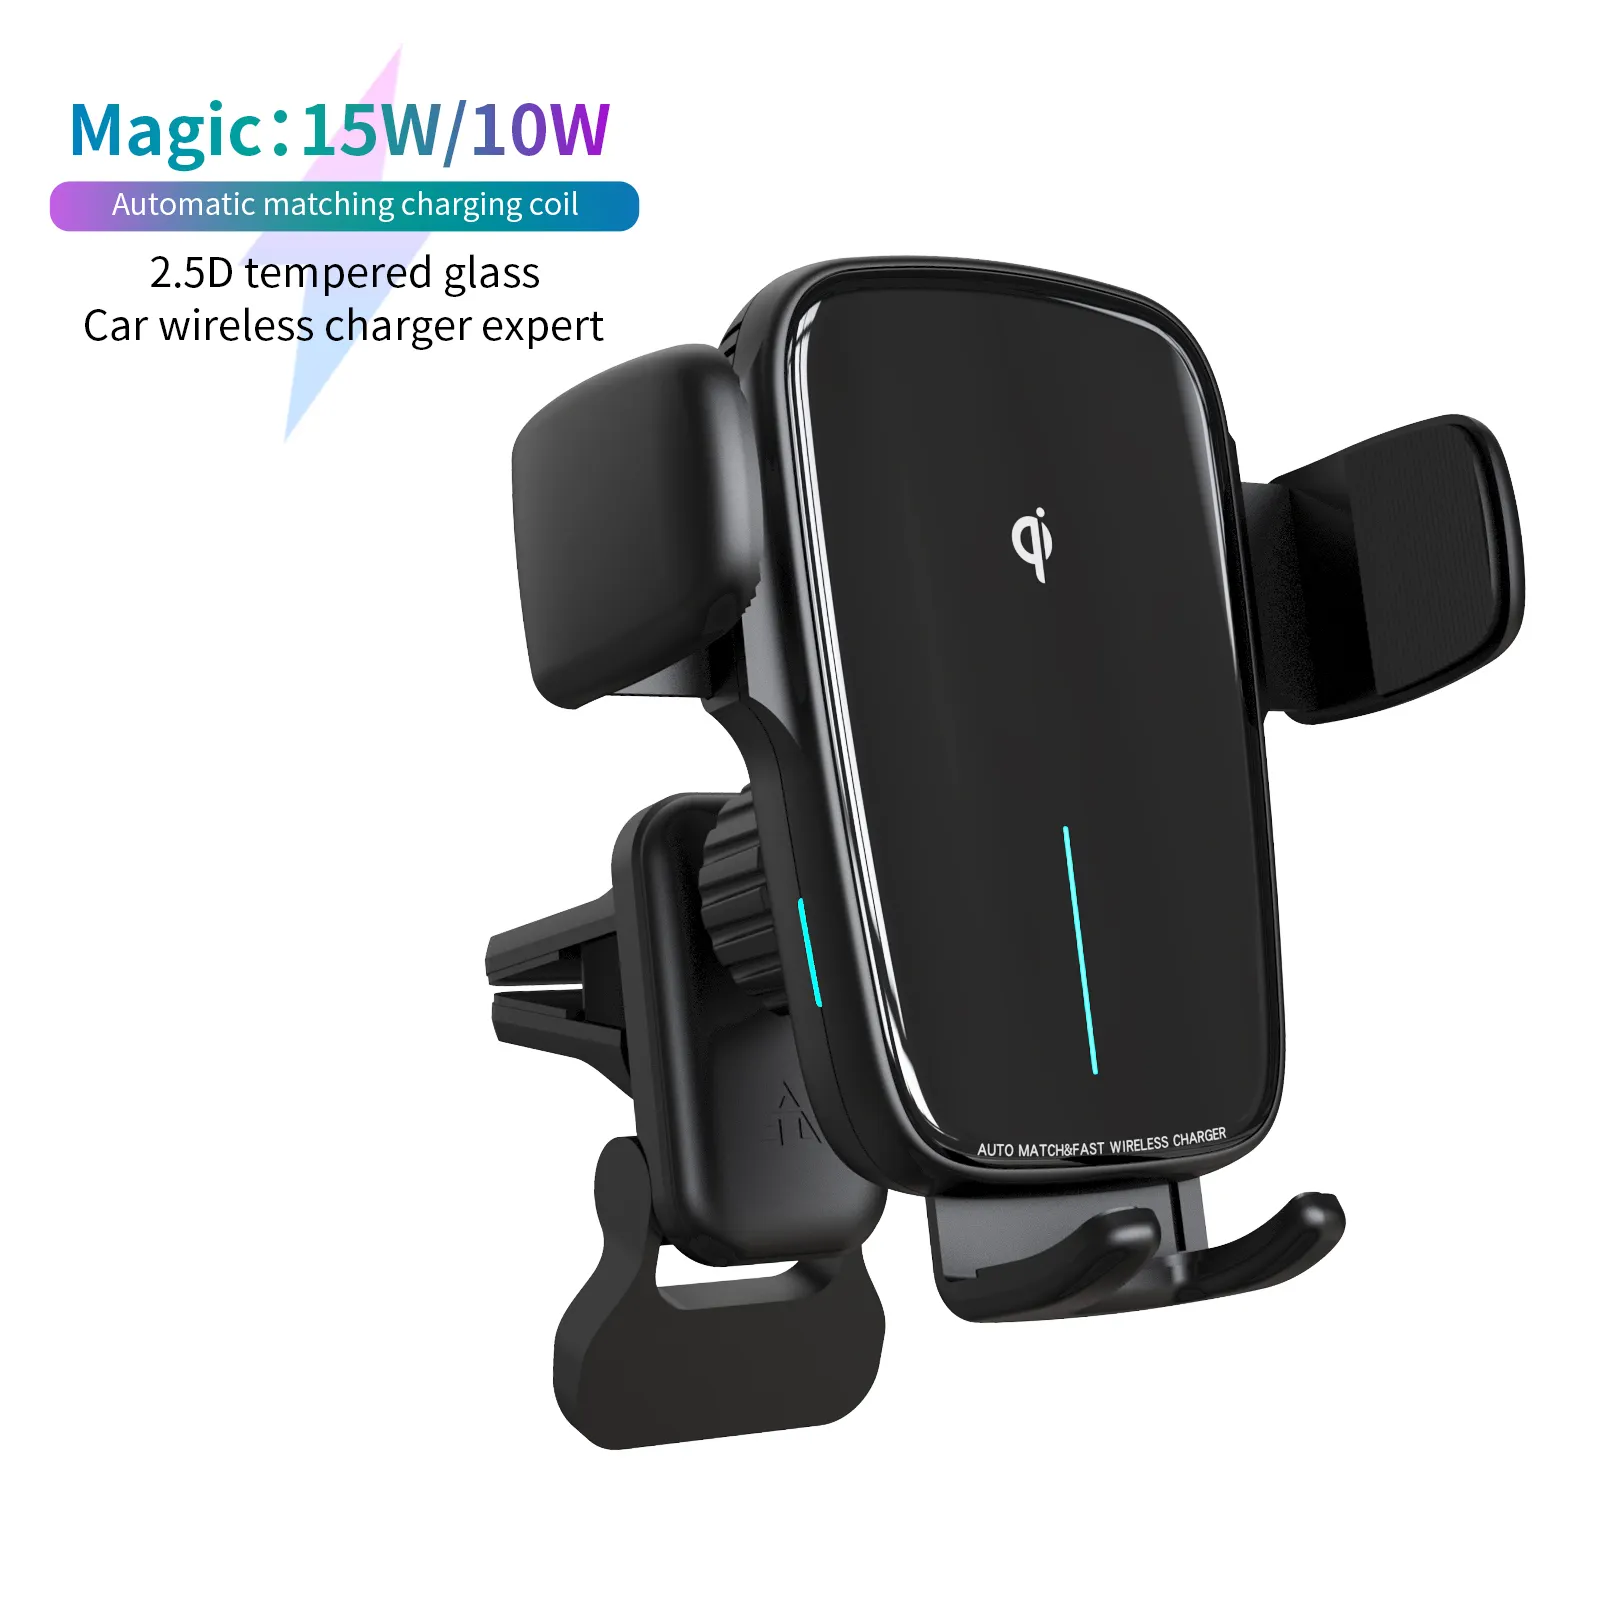 New arrival magic 15w New automatic matching coil 15w Fast Car Wireless phone Charger for iphone8-14 xiaomi huawei